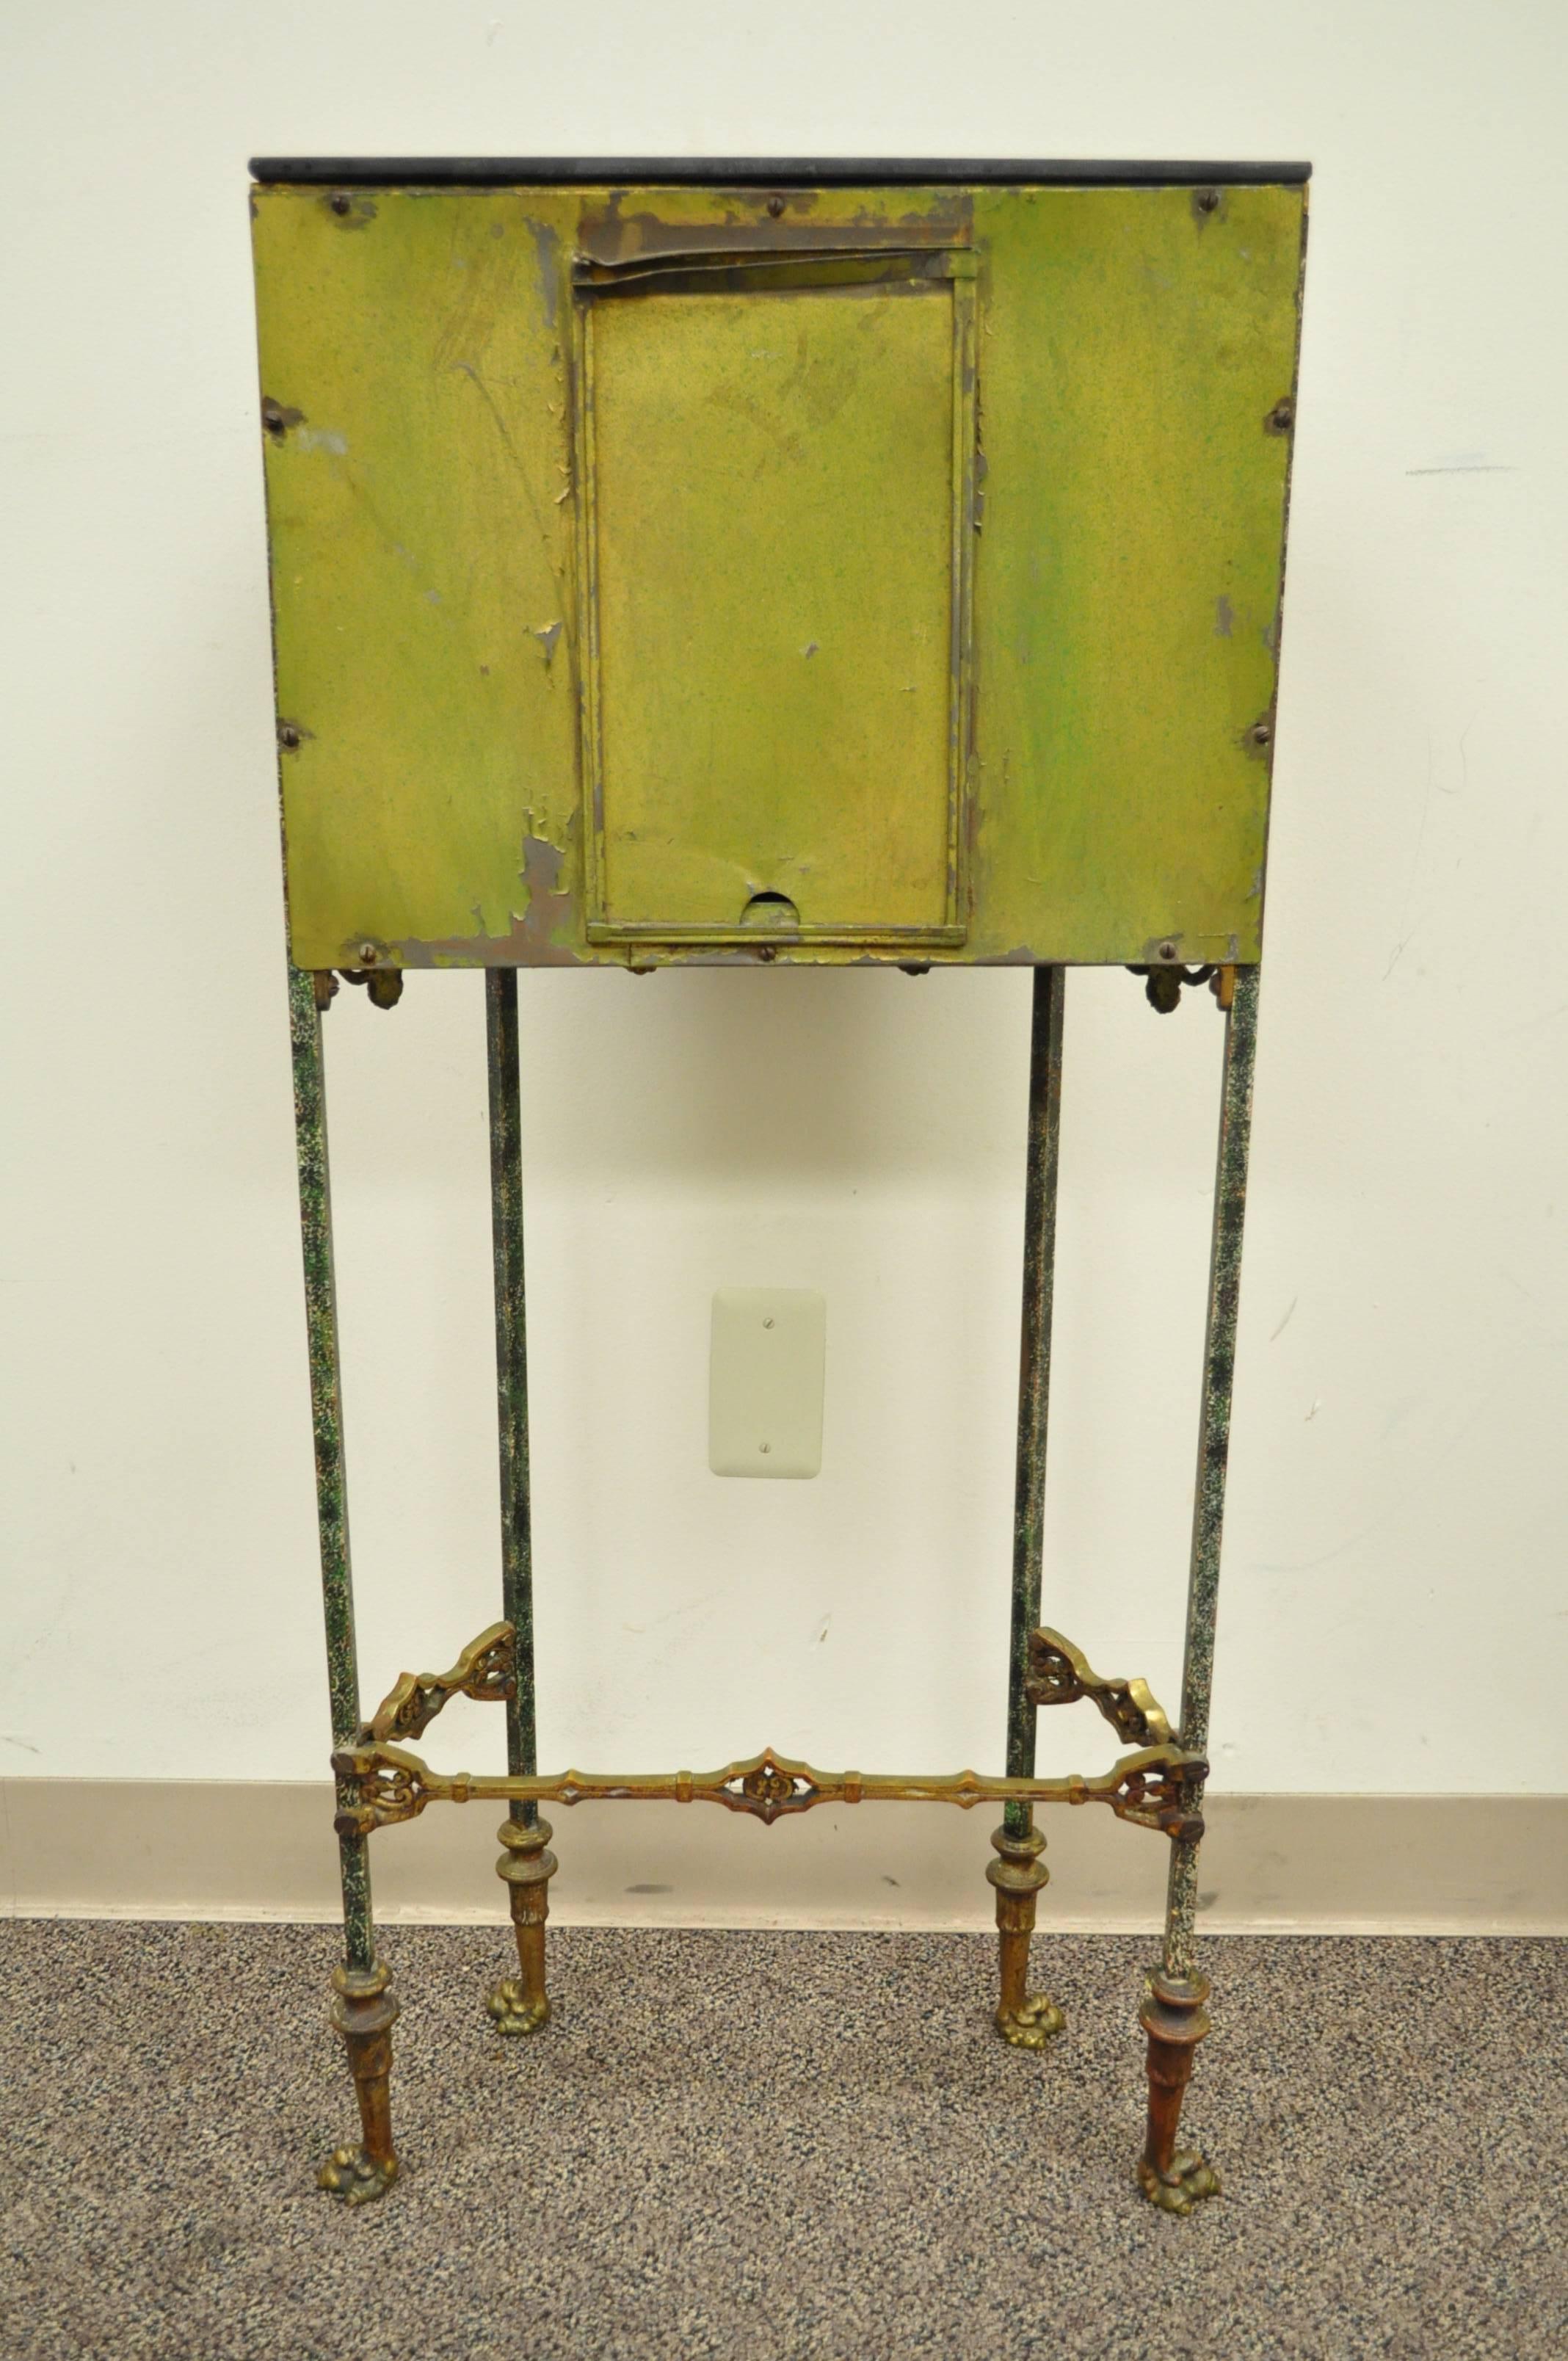 Figural Bronze and Iron Telephone Stand and Chair Attributed Oscar Bach 1